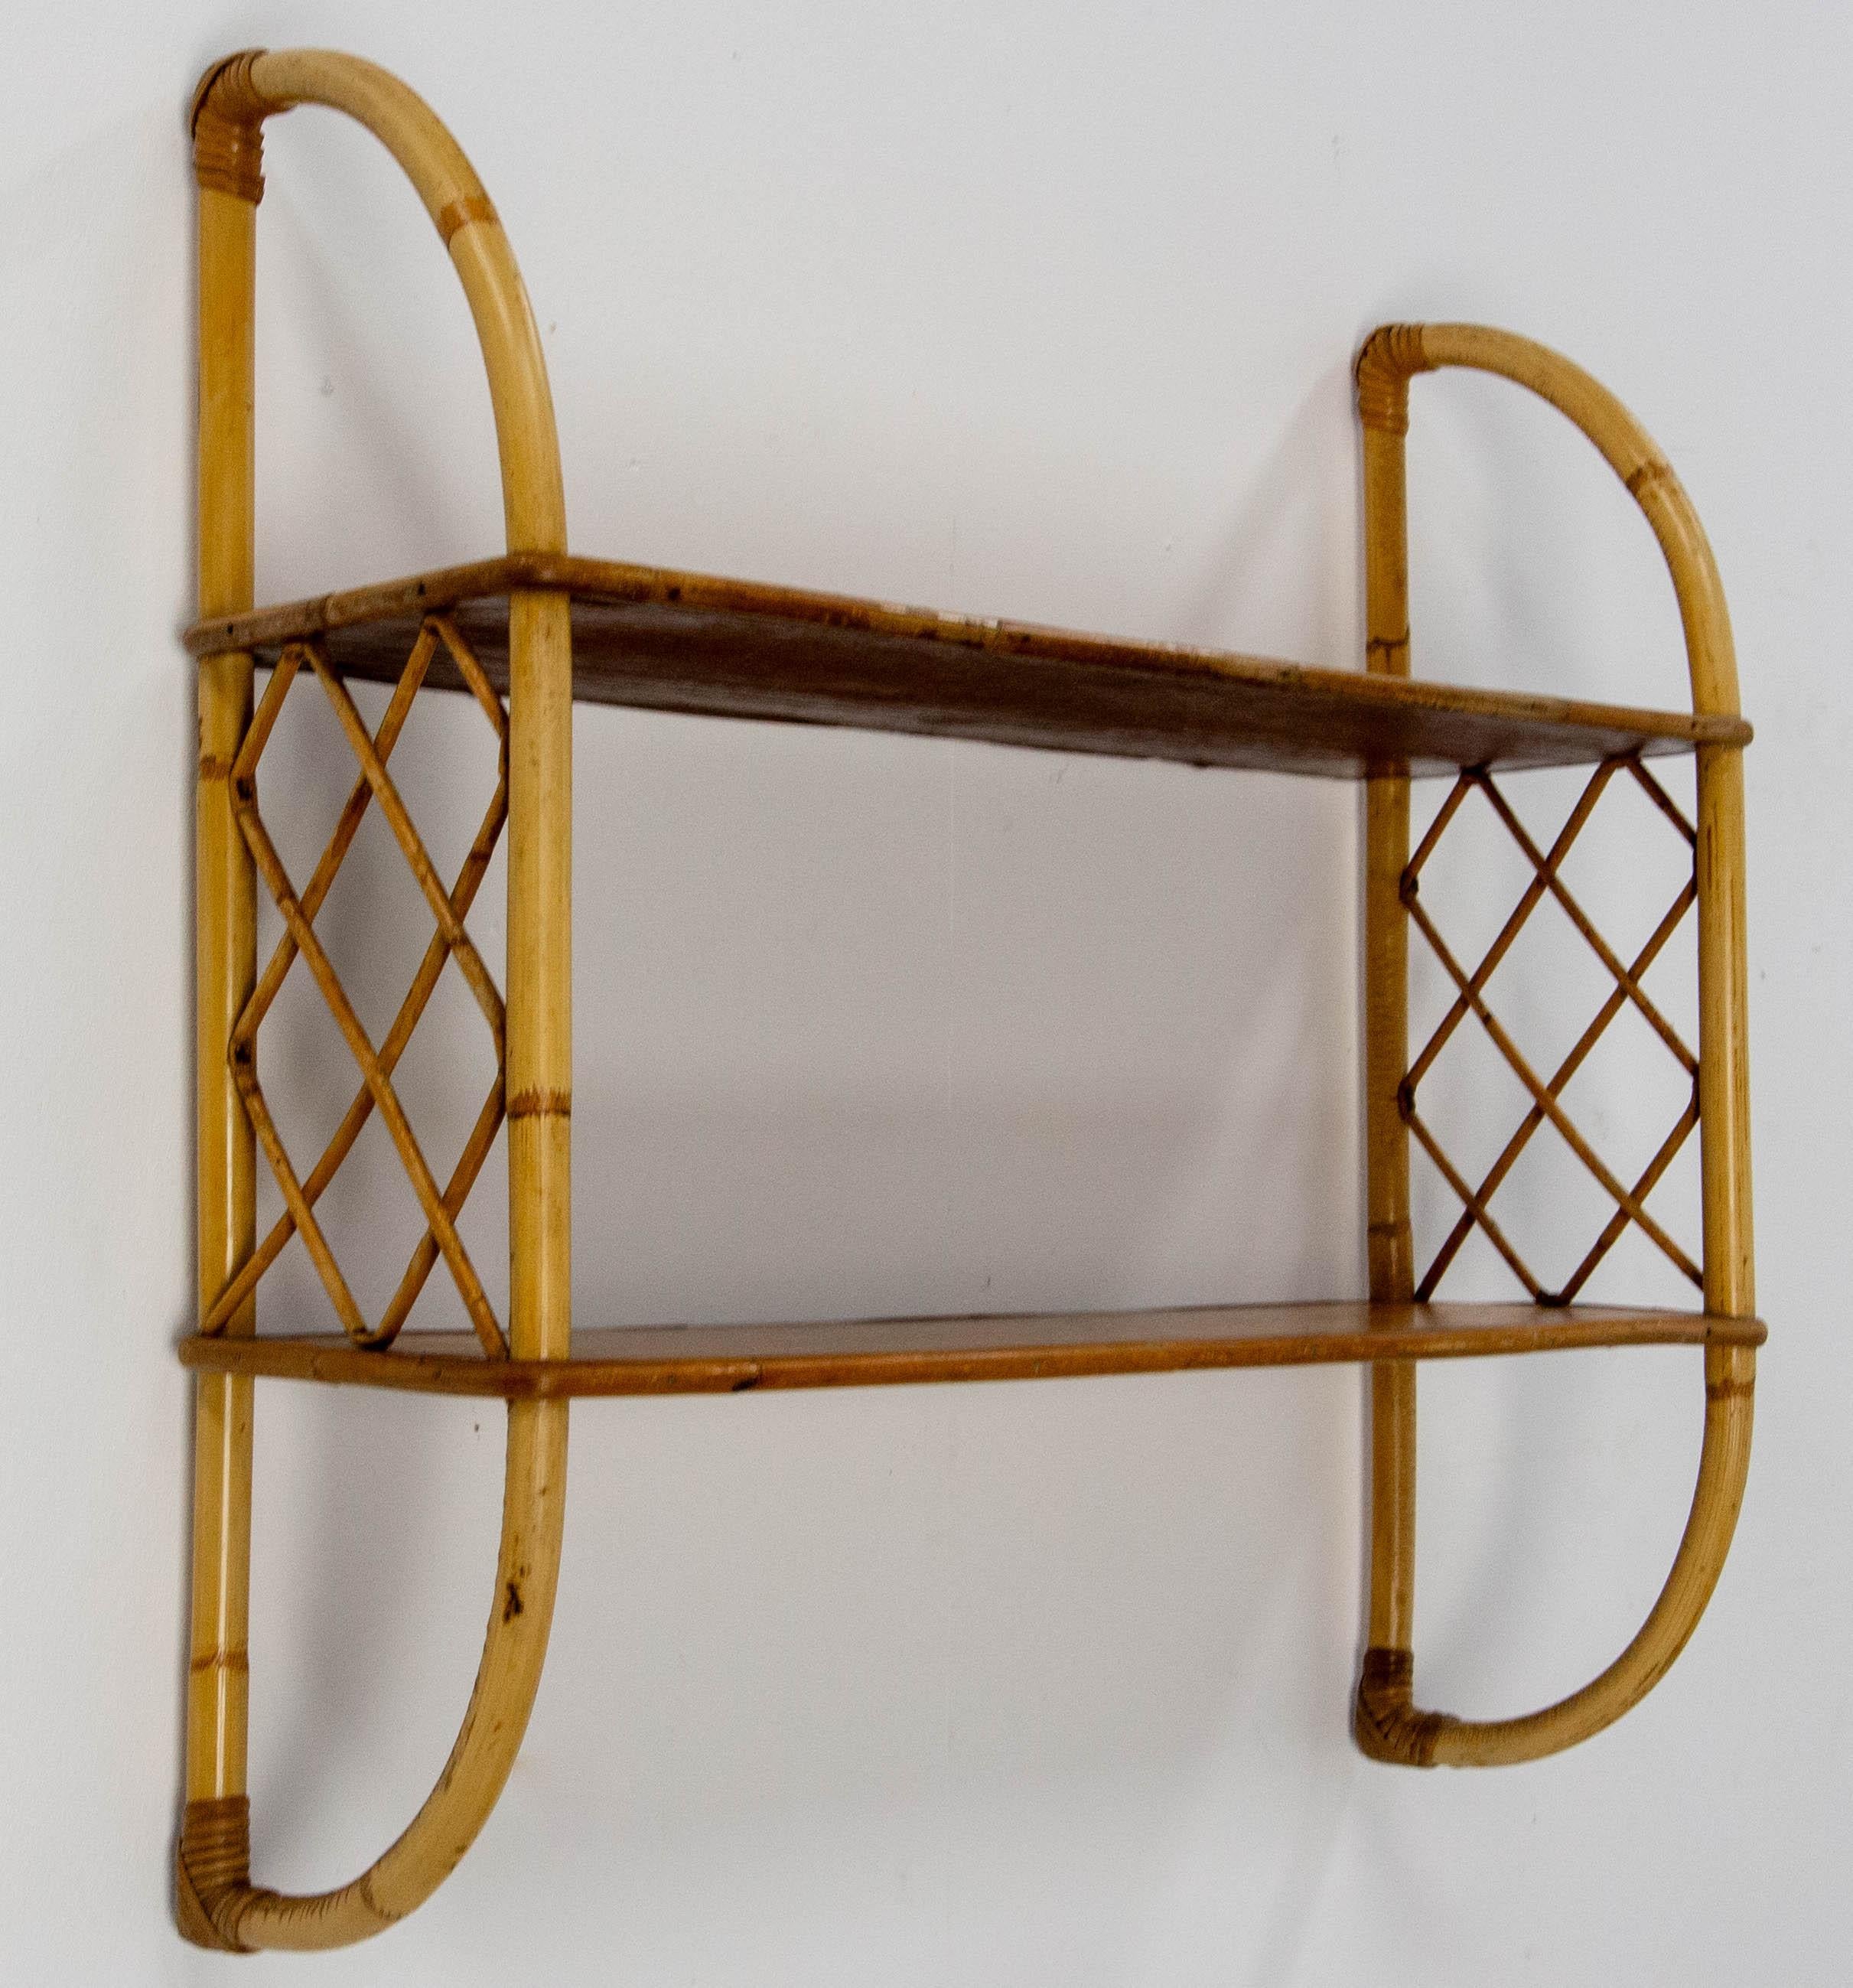 Wall shelves in wood and rattan. This kind of materiel and rounded shapes are typical of the 70's.
Mid 20th century, France

Shipping:
21 / 61.5 / 62.5 cm 1.8 kg.
  